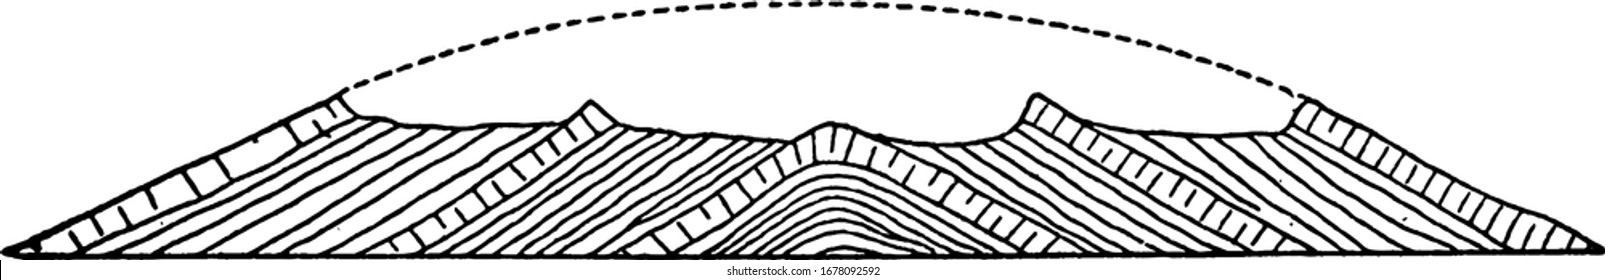 A typical representation of the cross section of an eroded anticline, each half of the fold dips away from the crest, vintage line drawing or engraving illustration.